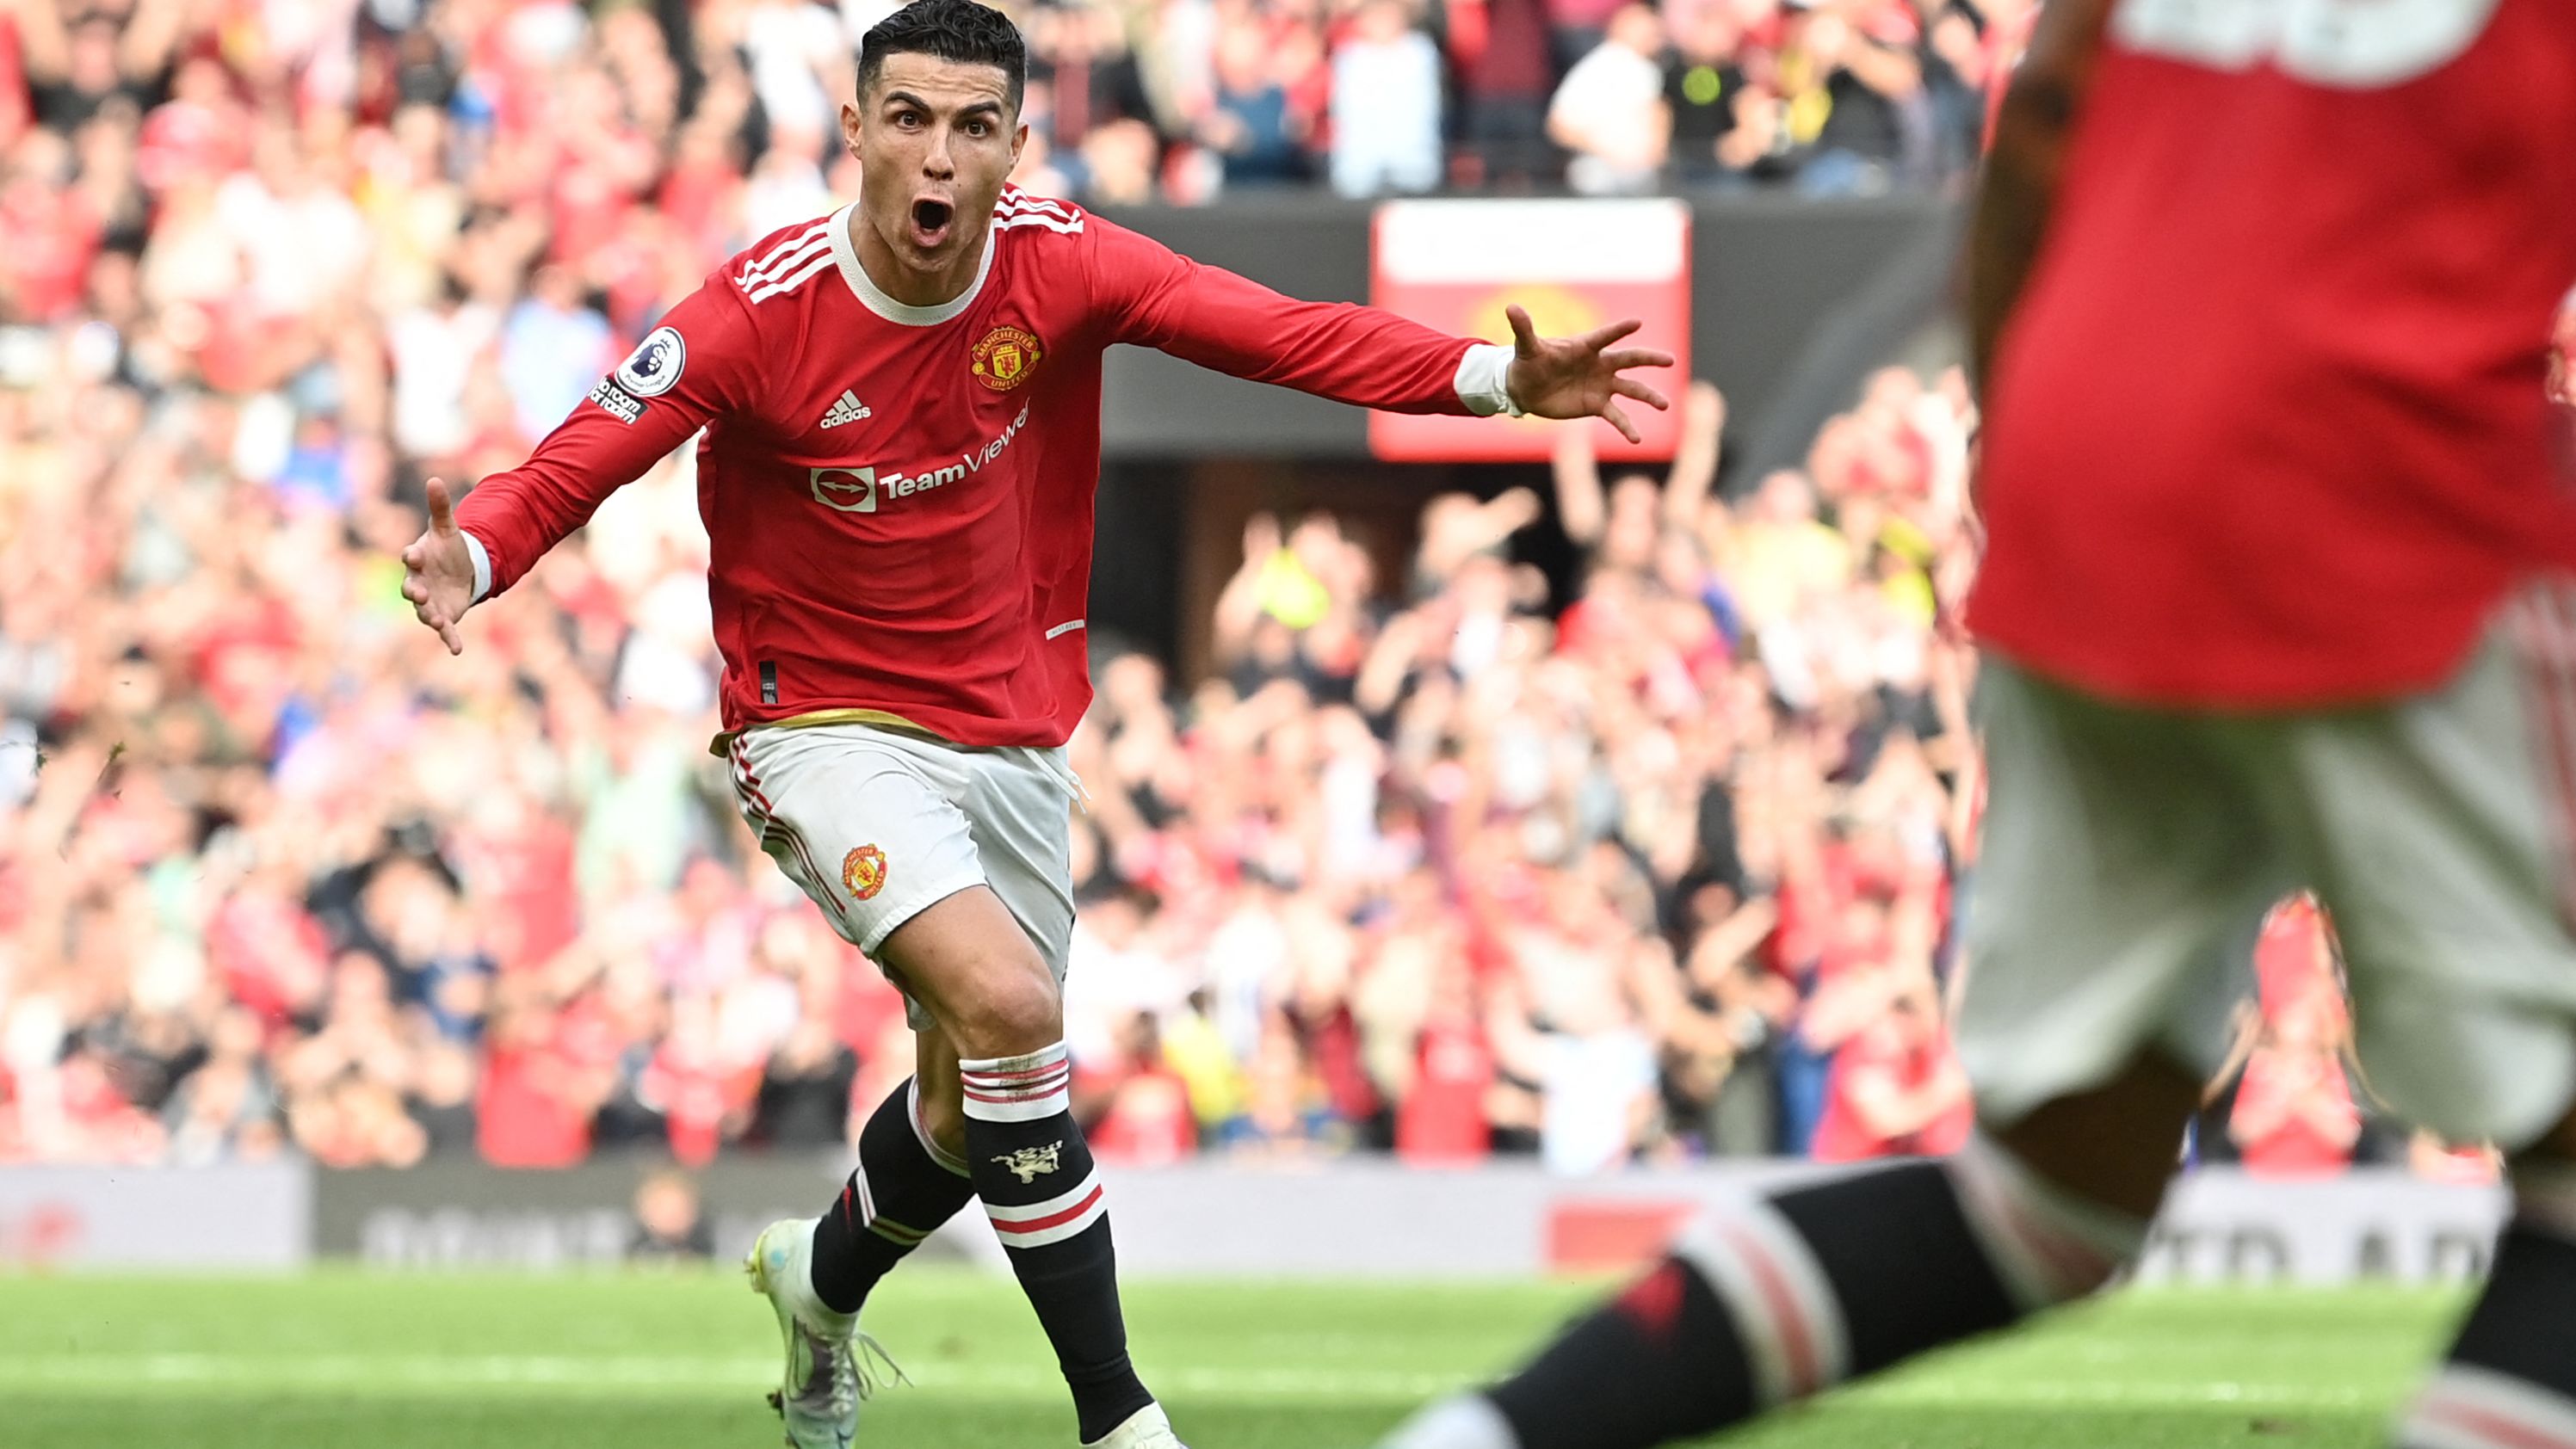 Manchester United's Portuguese striker Cristiano Ronaldo celebrates after scoring his third goal against Norwich.